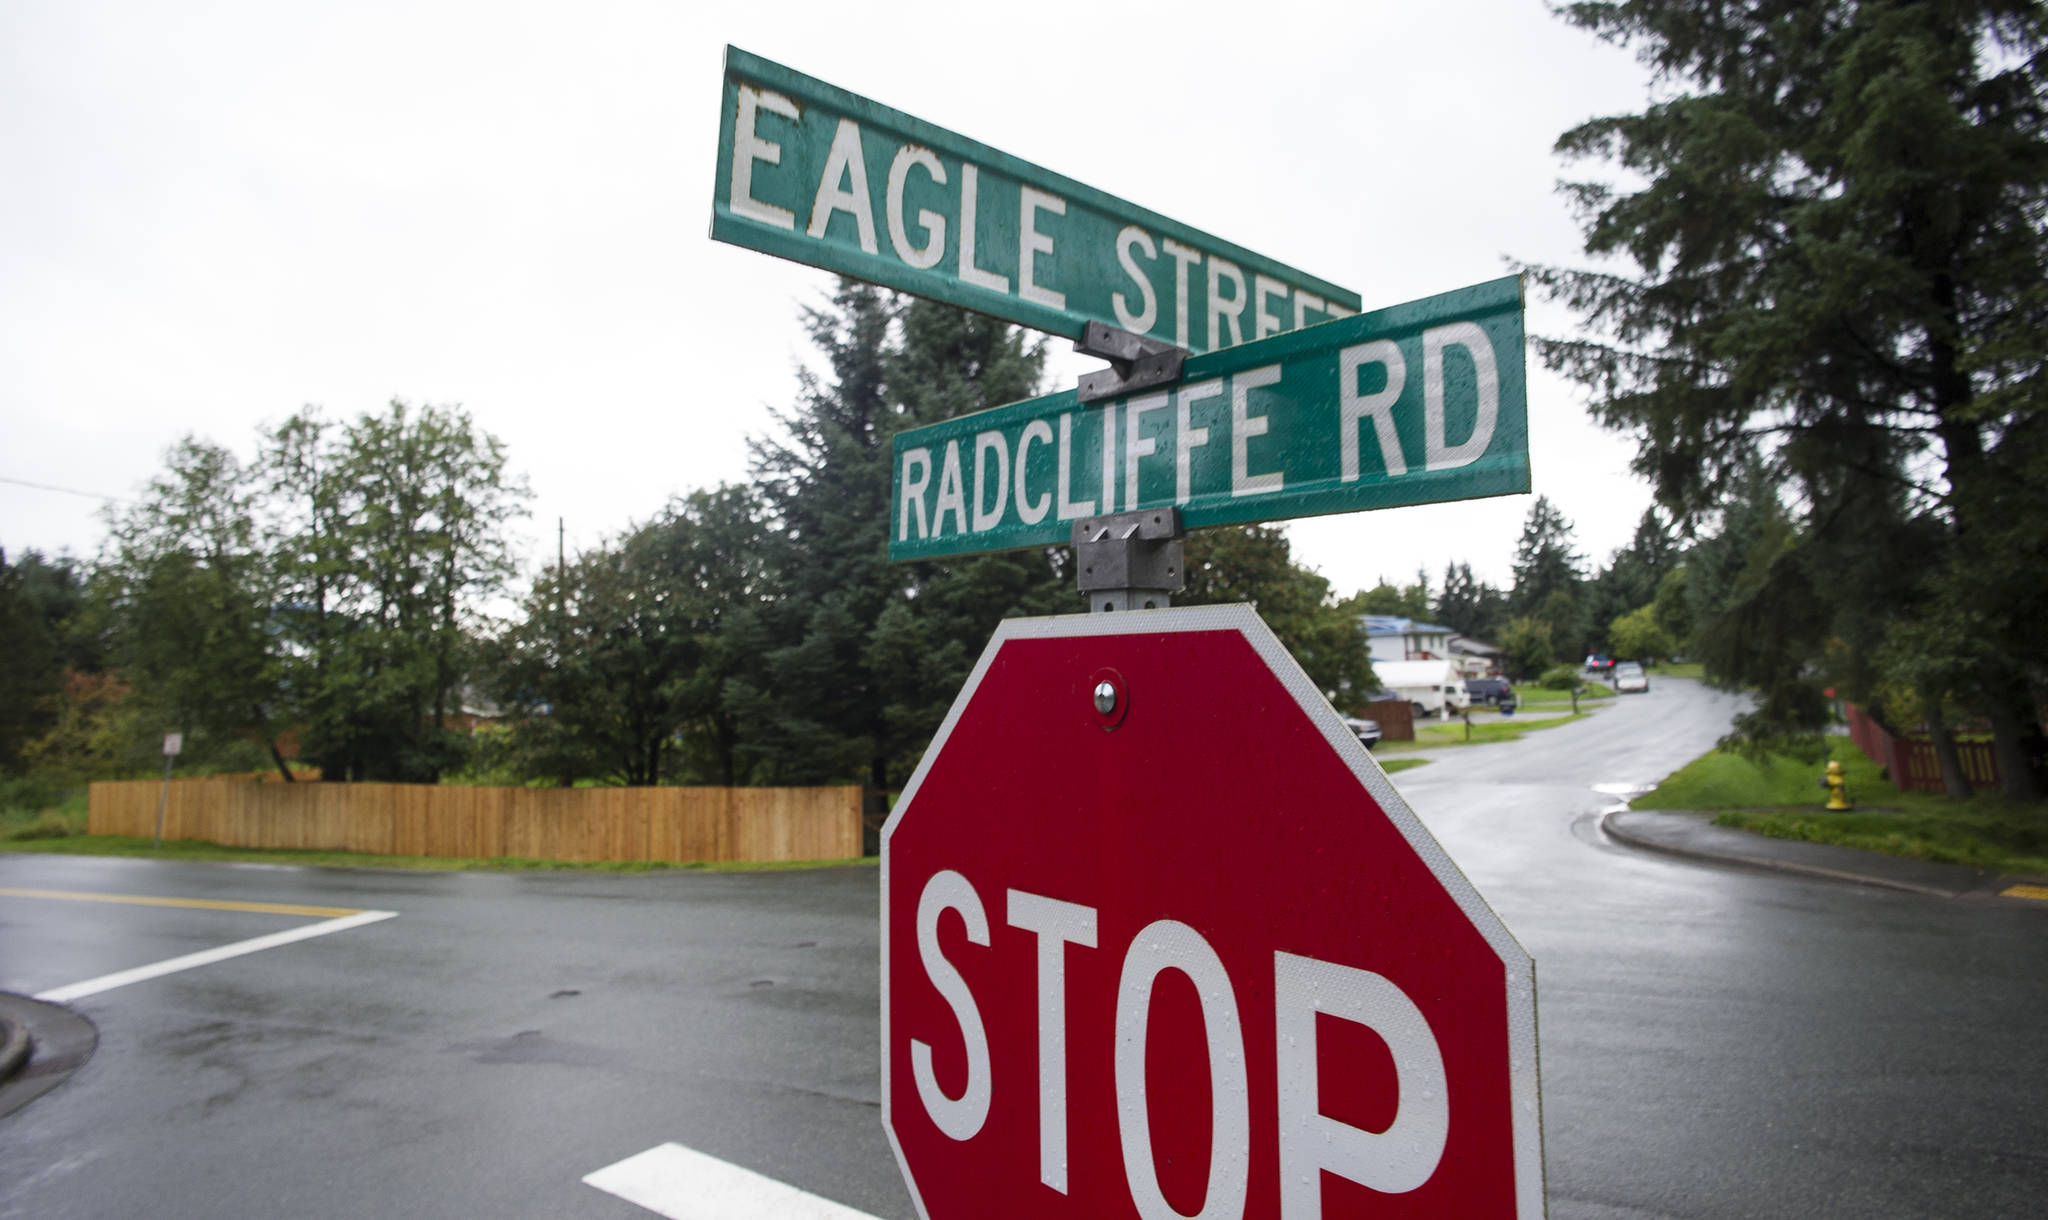 The body of Robert Harold Houtary was discovered near the intersection of Radcliffe Road and Eagle Street on Thursday, Sept. 7, 2017. (Michael Penn | Juneau Empire)